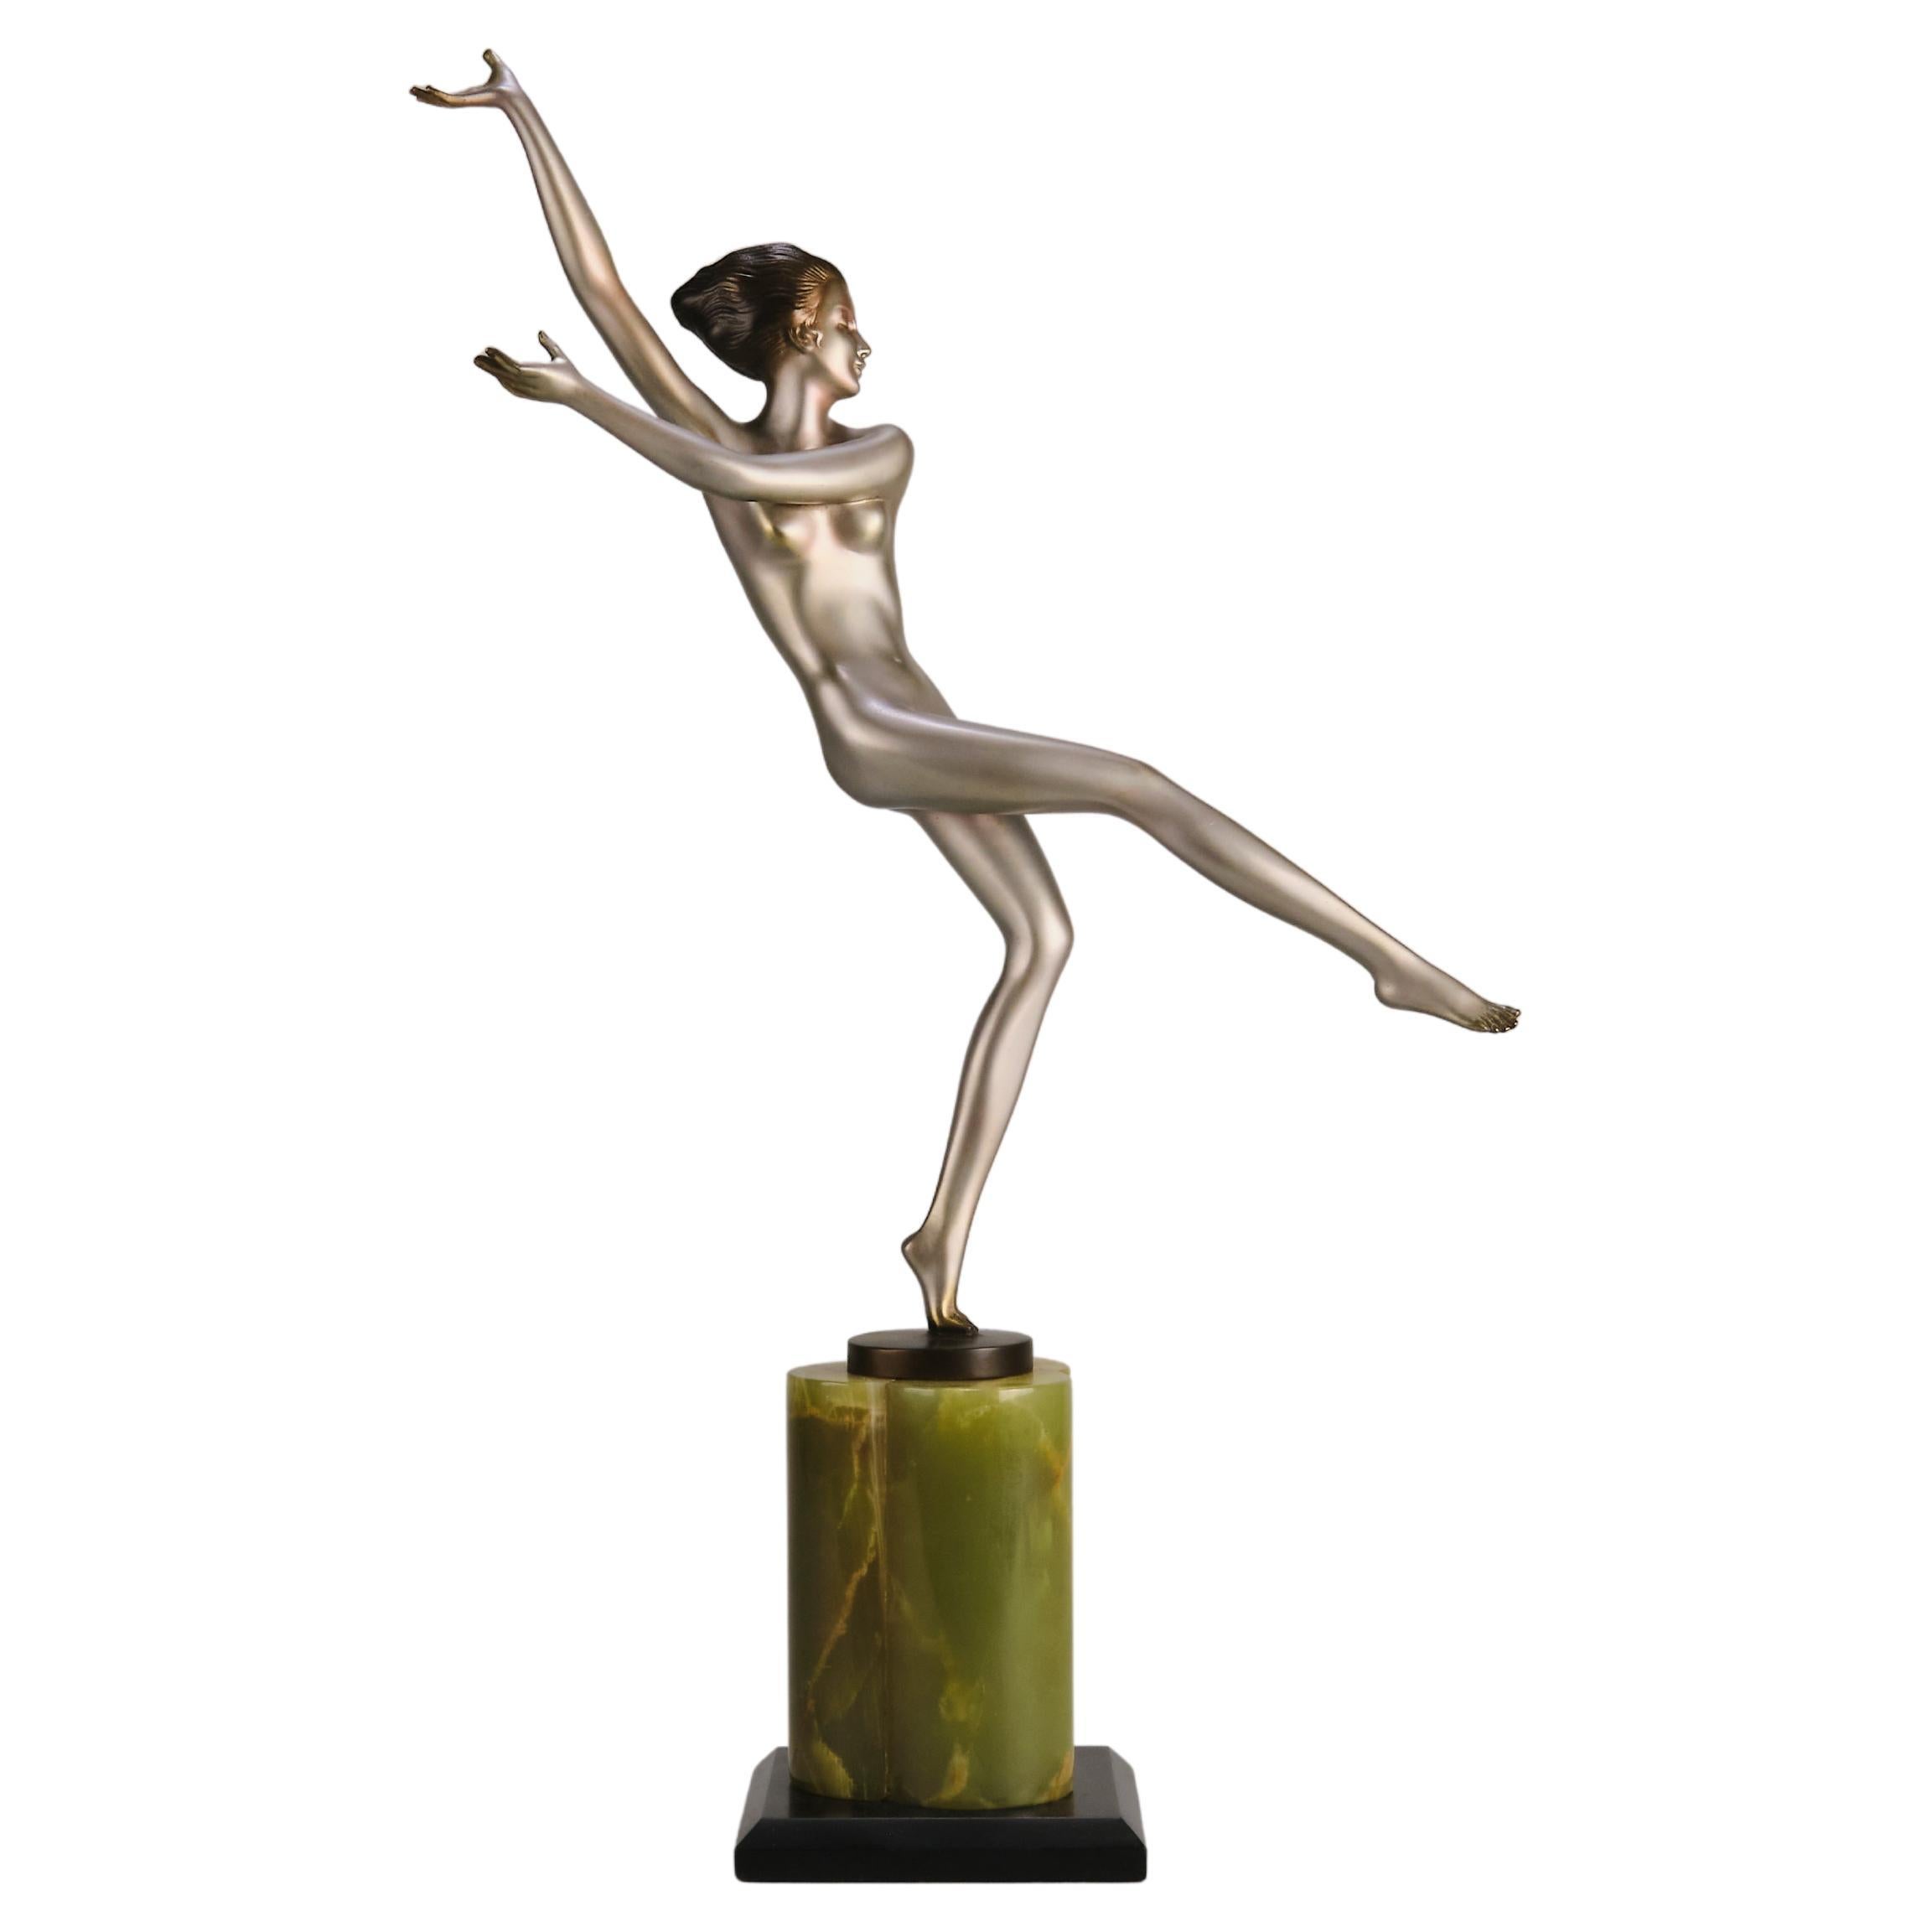 20th Century Cold-Painted Austrian Bronze Entitled "Leg Out" by Josef Lorenzl For Sale